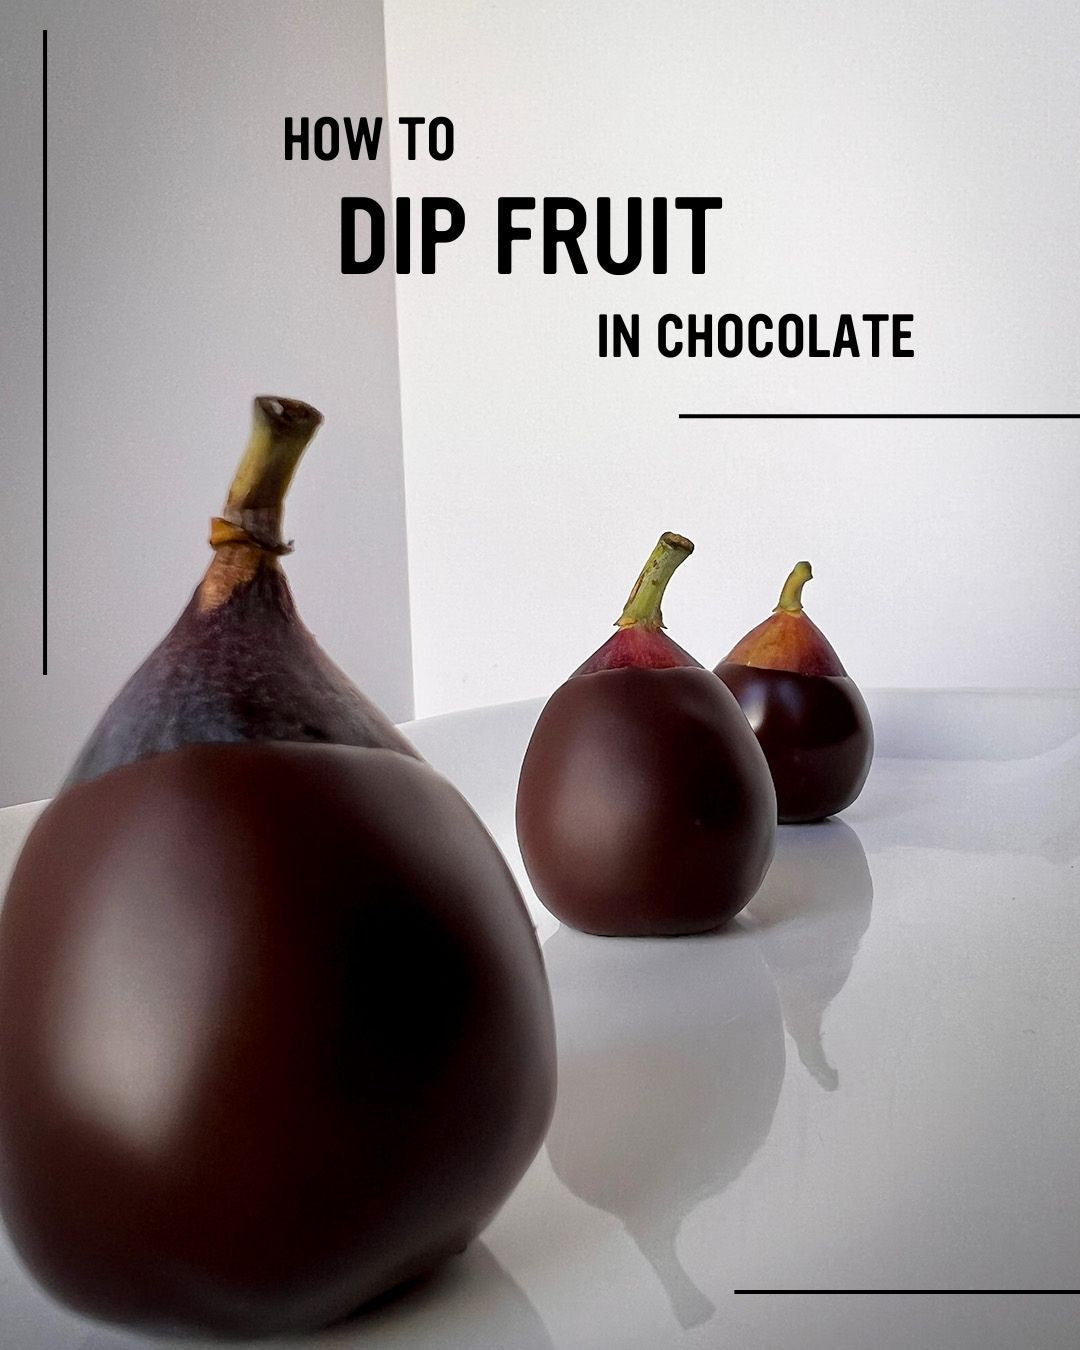 Dipping Fresh Fruit in Chocolate